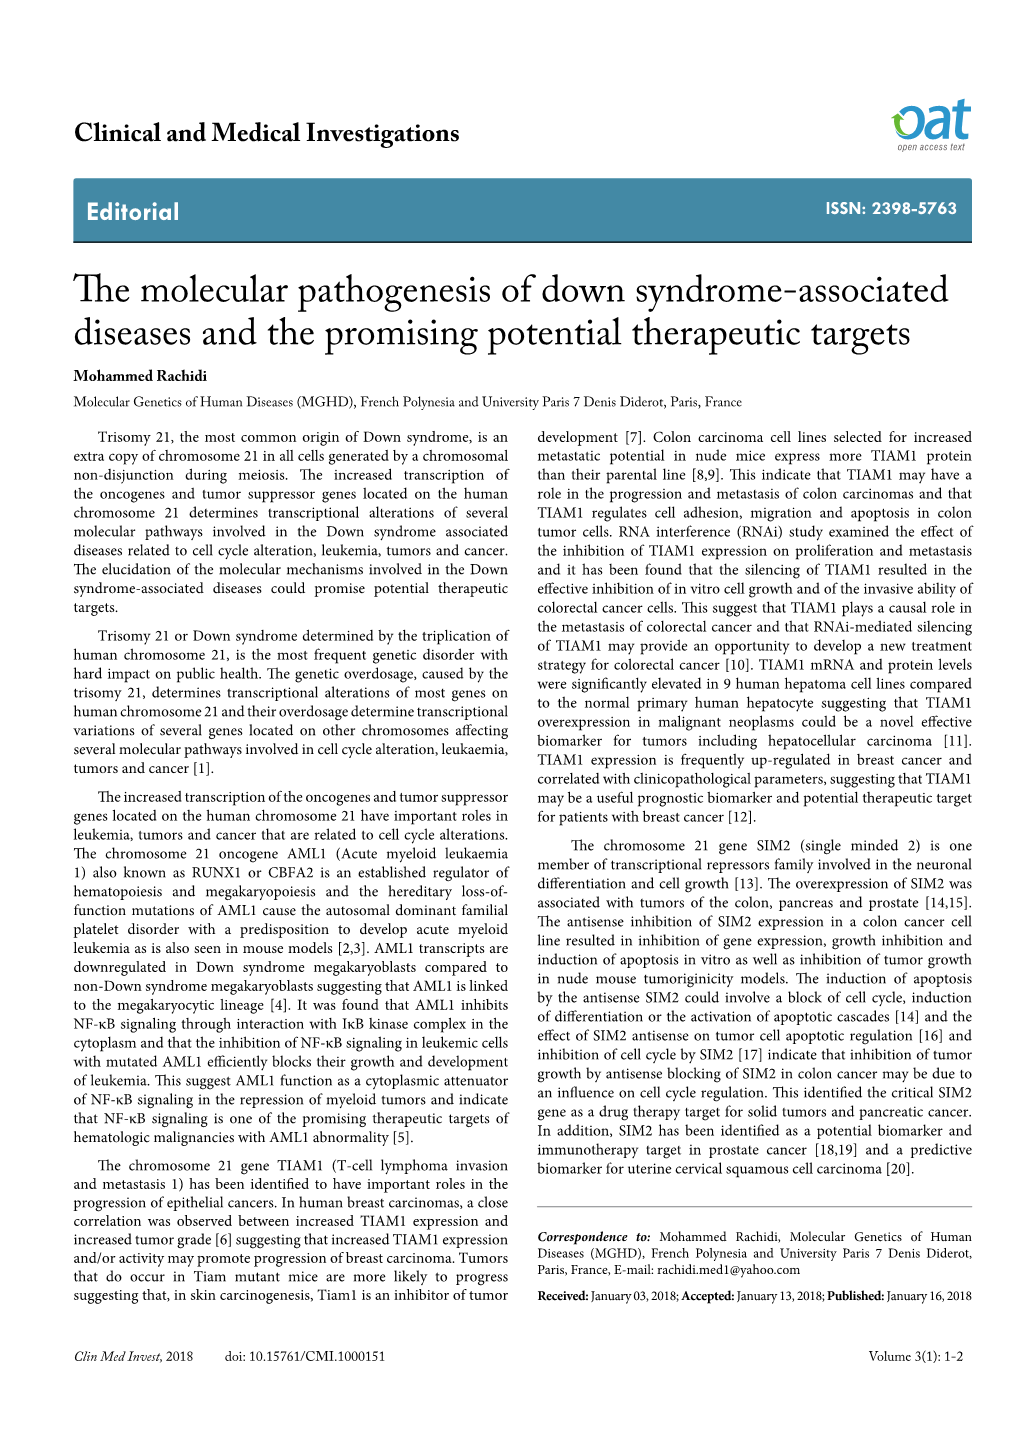 The Molecular Pathogenesis of Down Syndrome-Associated Diseases And